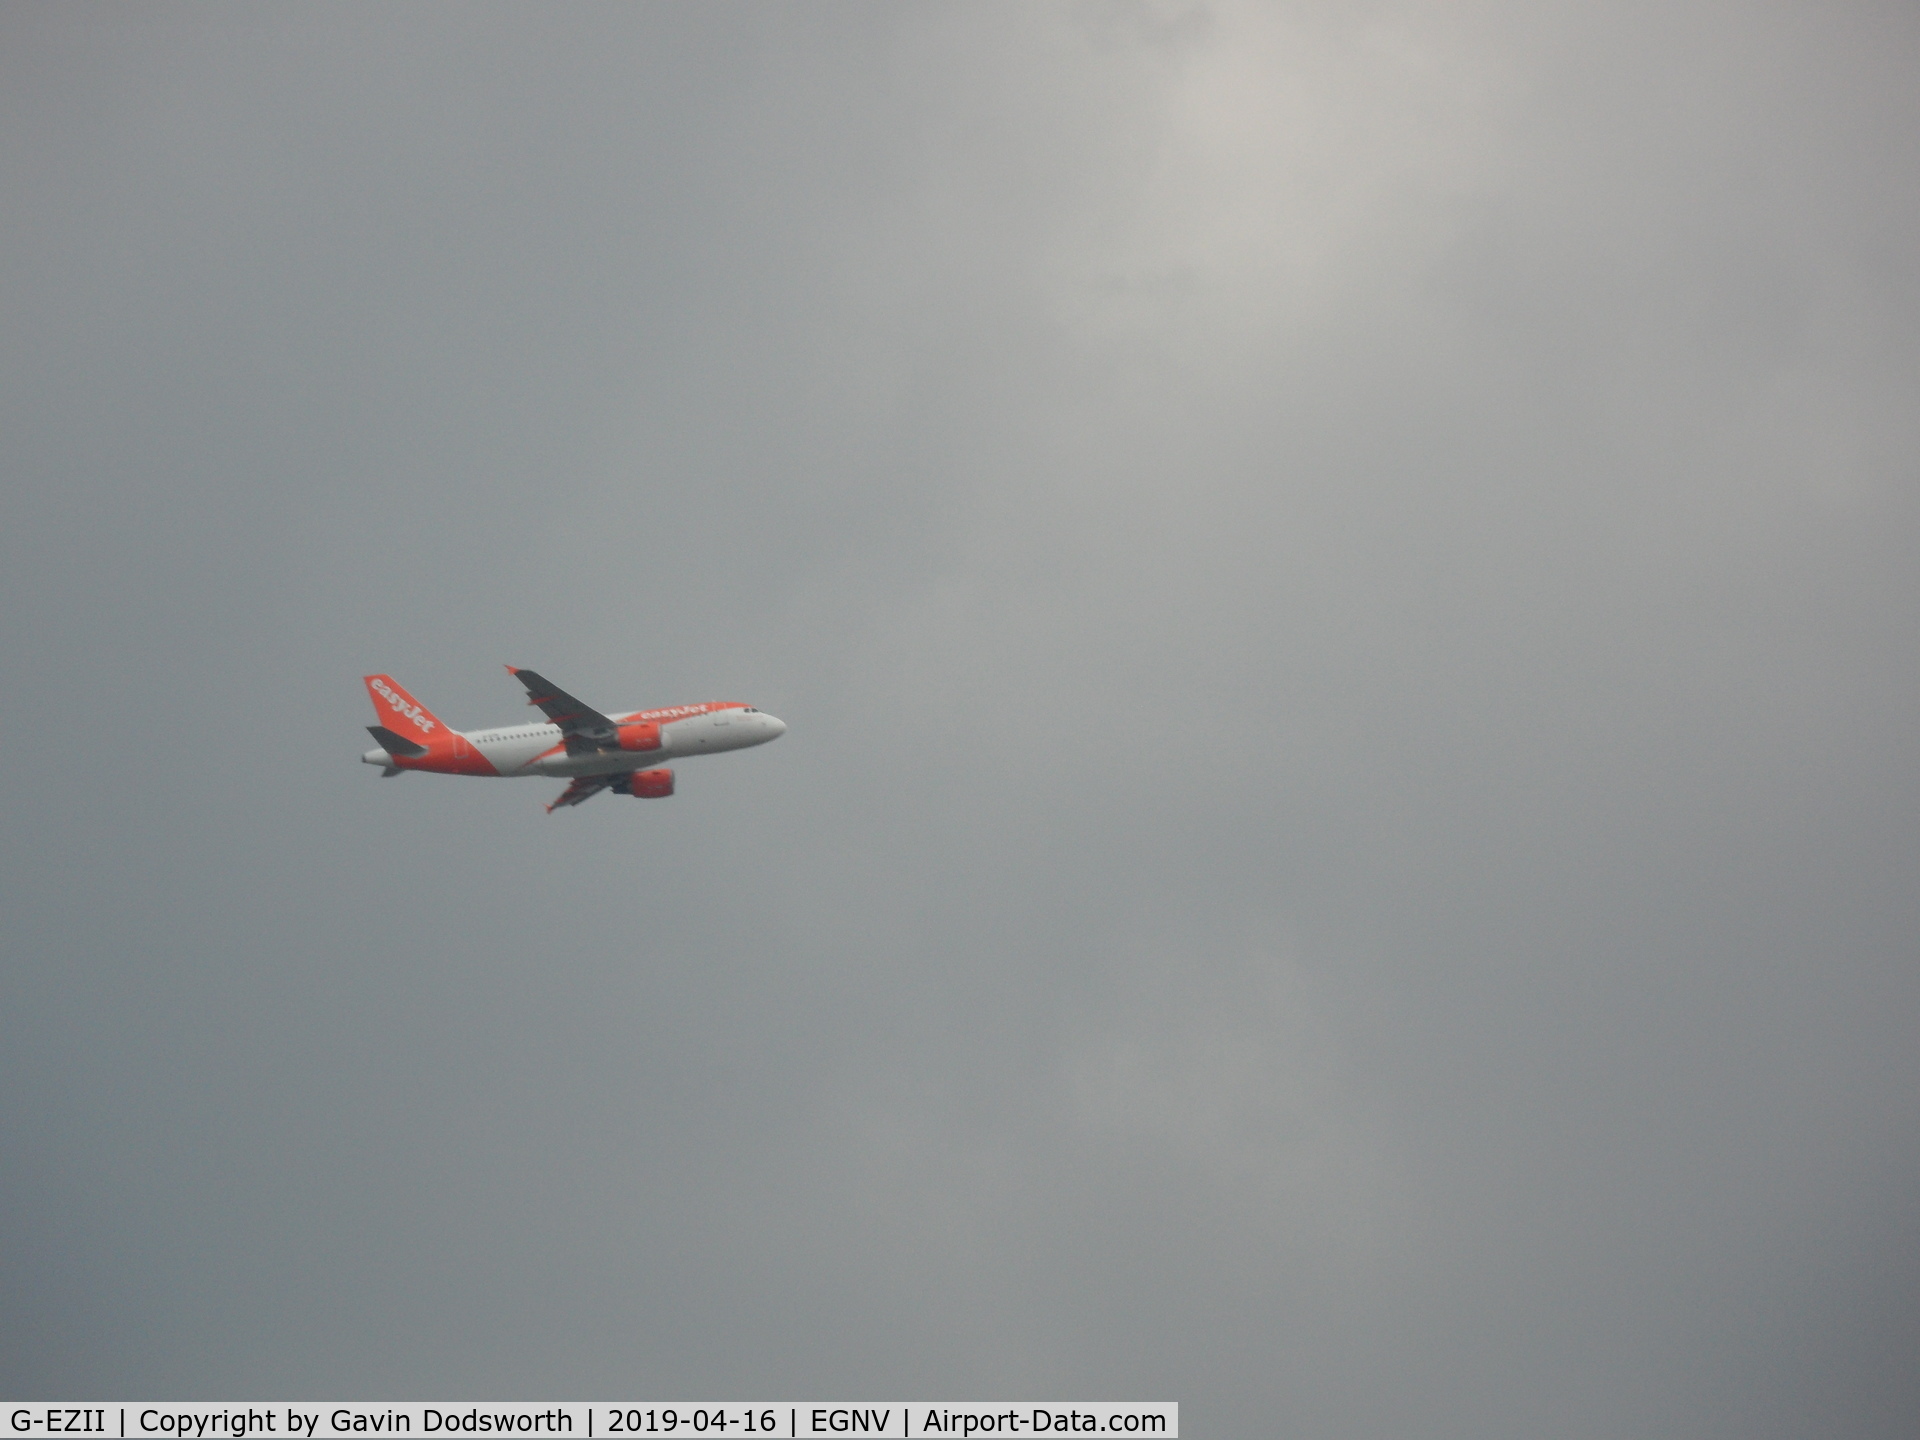 G-EZII, 2005 Airbus A319-111 C/N 2471, easyJet over Darlington on their weekly touch and go training at Teesside Airport